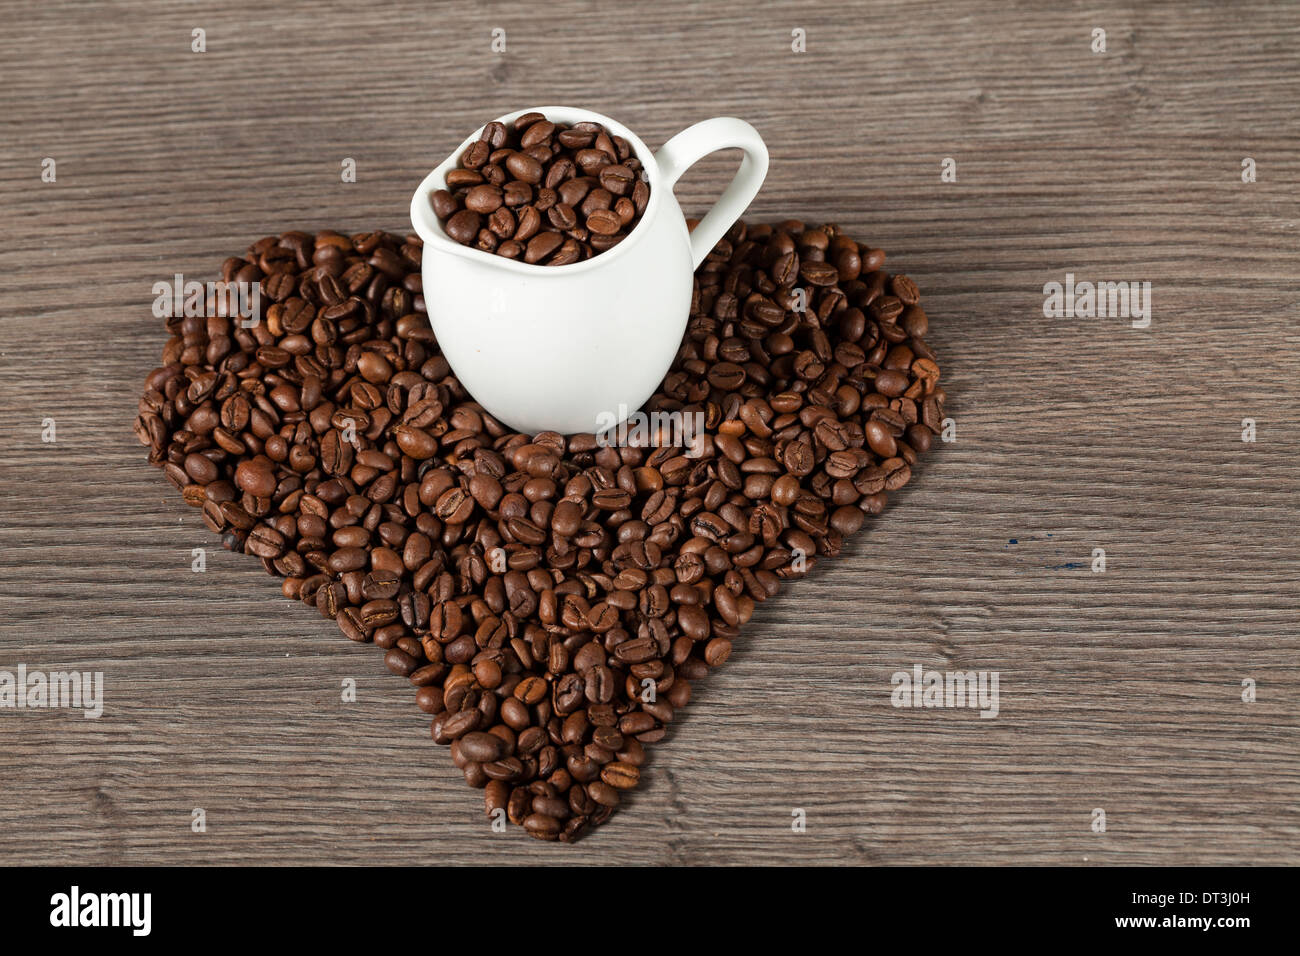 Coffee beans on wooden tale hart shape Stock Photo